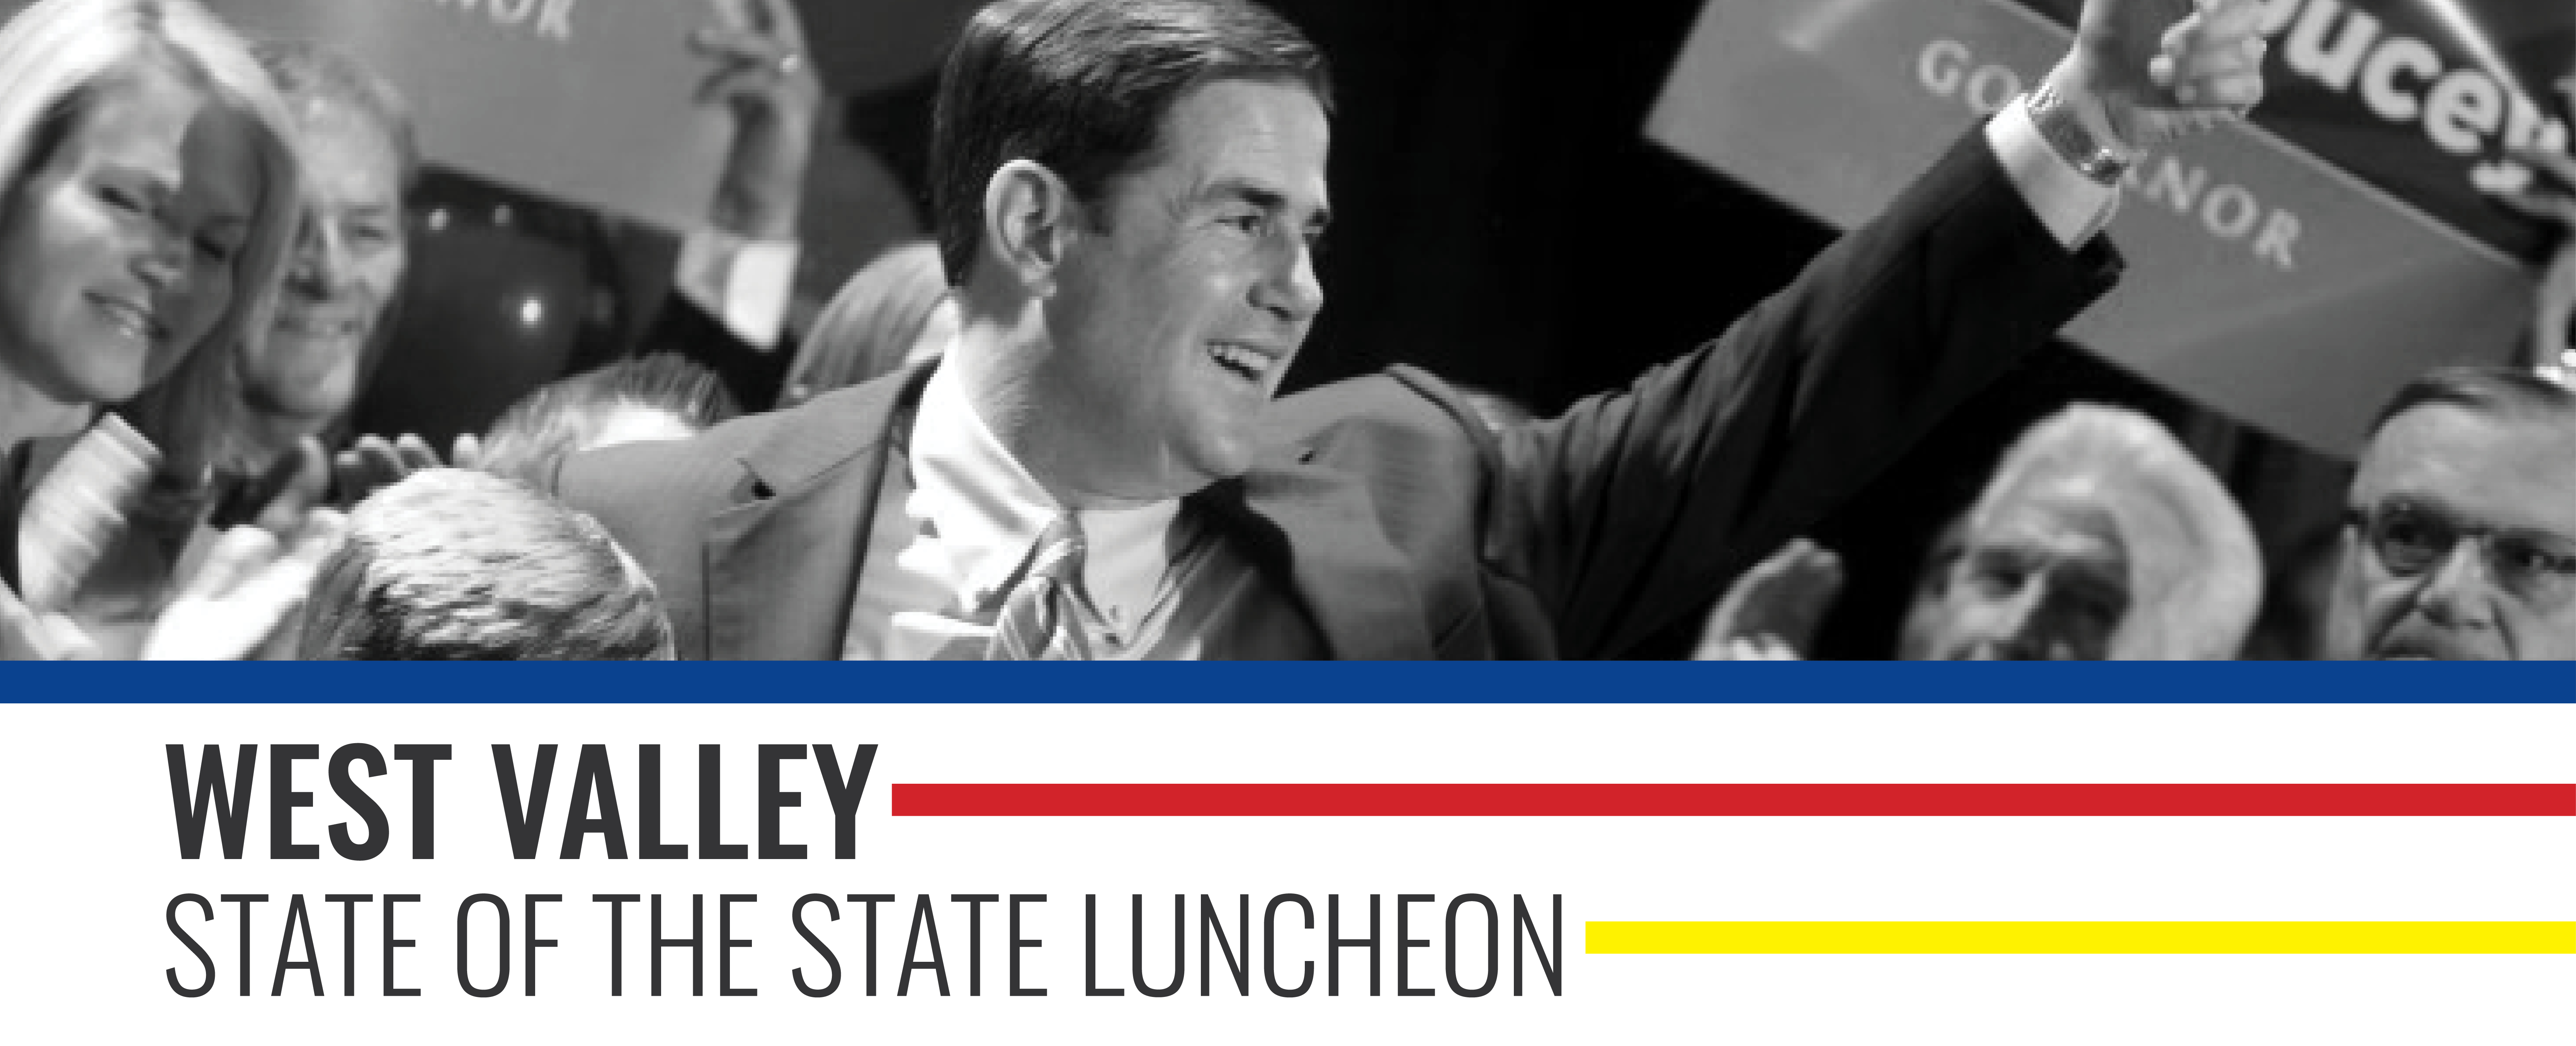 West Valley State of the State Luncheon - Header